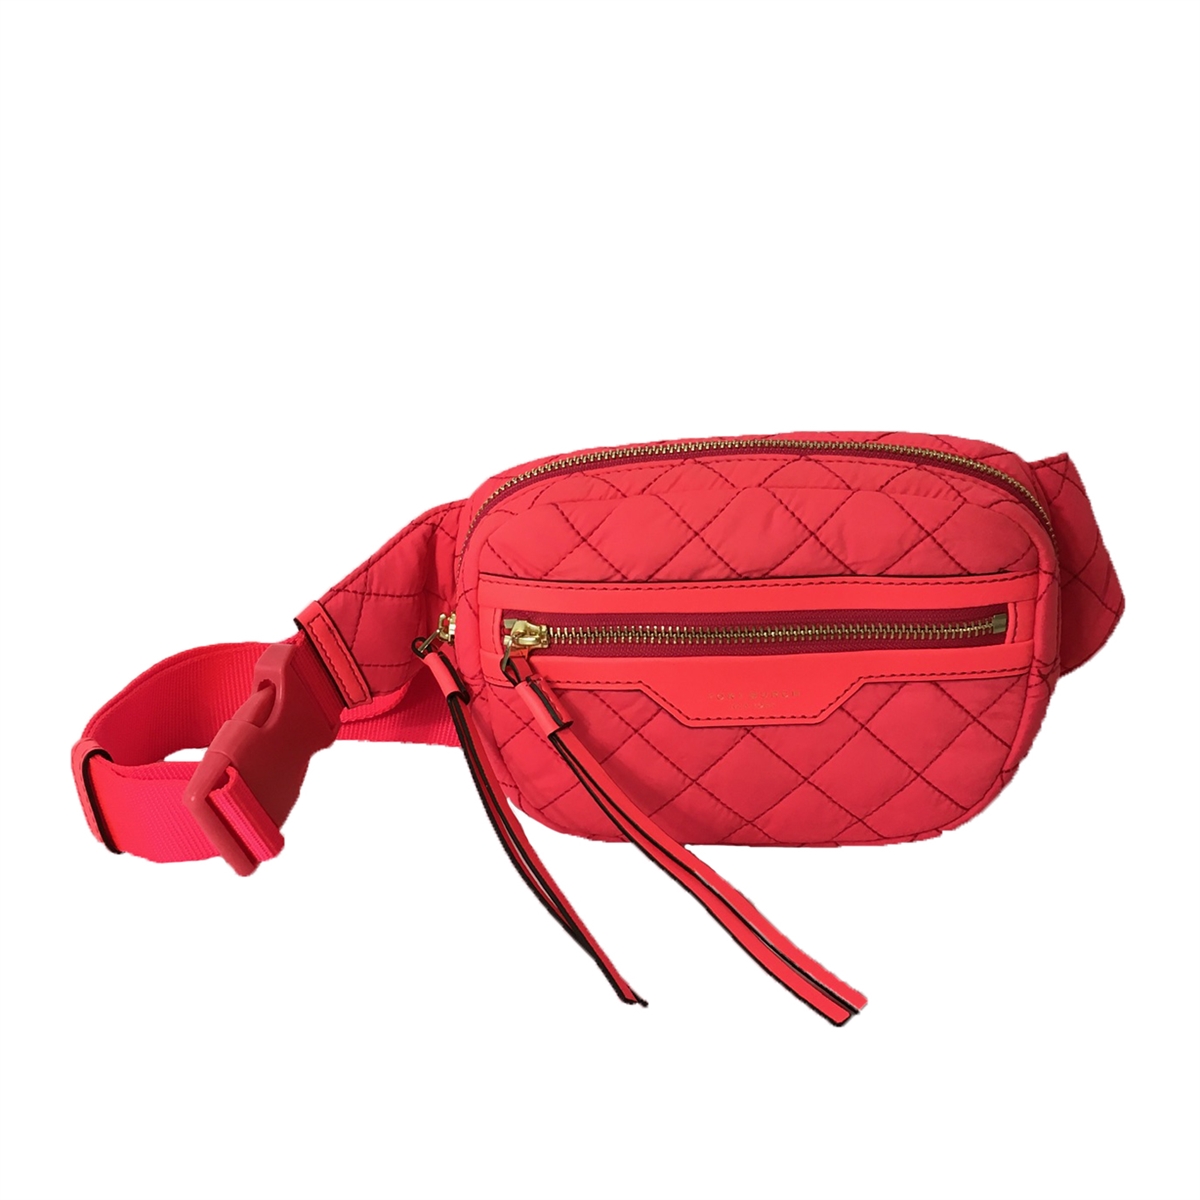 TORY BURCH PERRY QUILTED NYLONBELT BAG